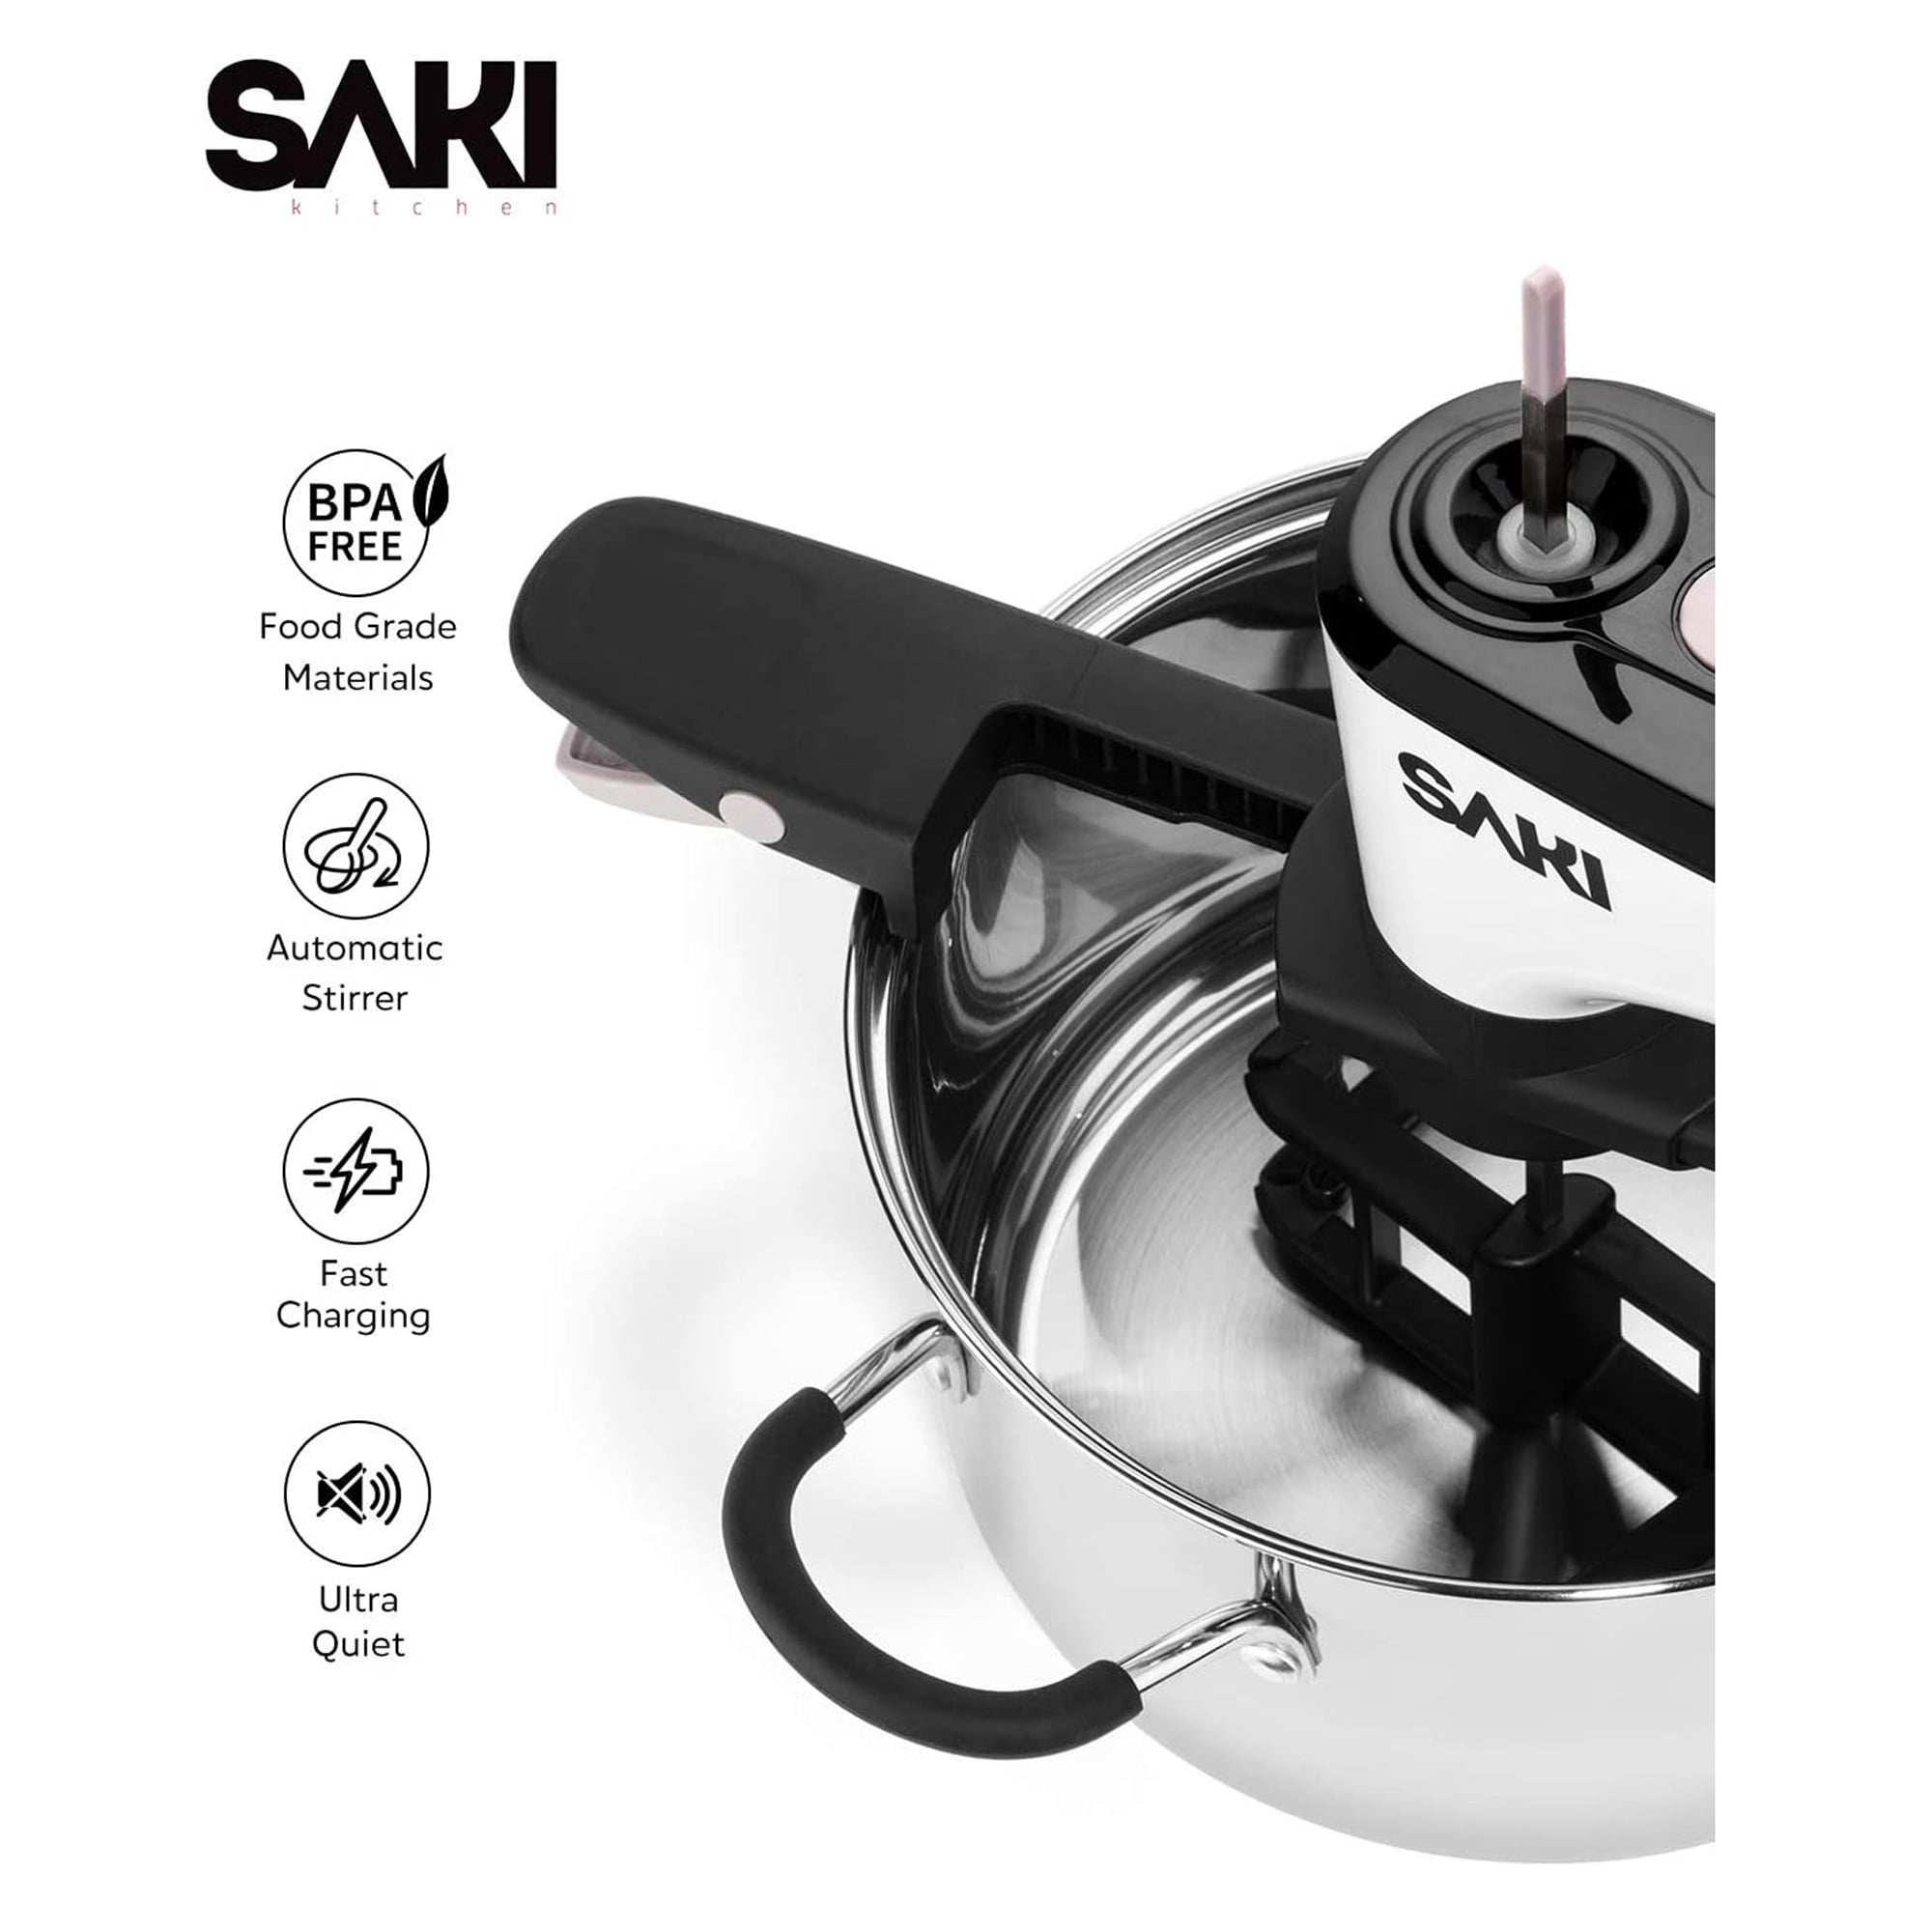 Saki Adjustable Speed Automatic Electric Hands Free Cooking Pot